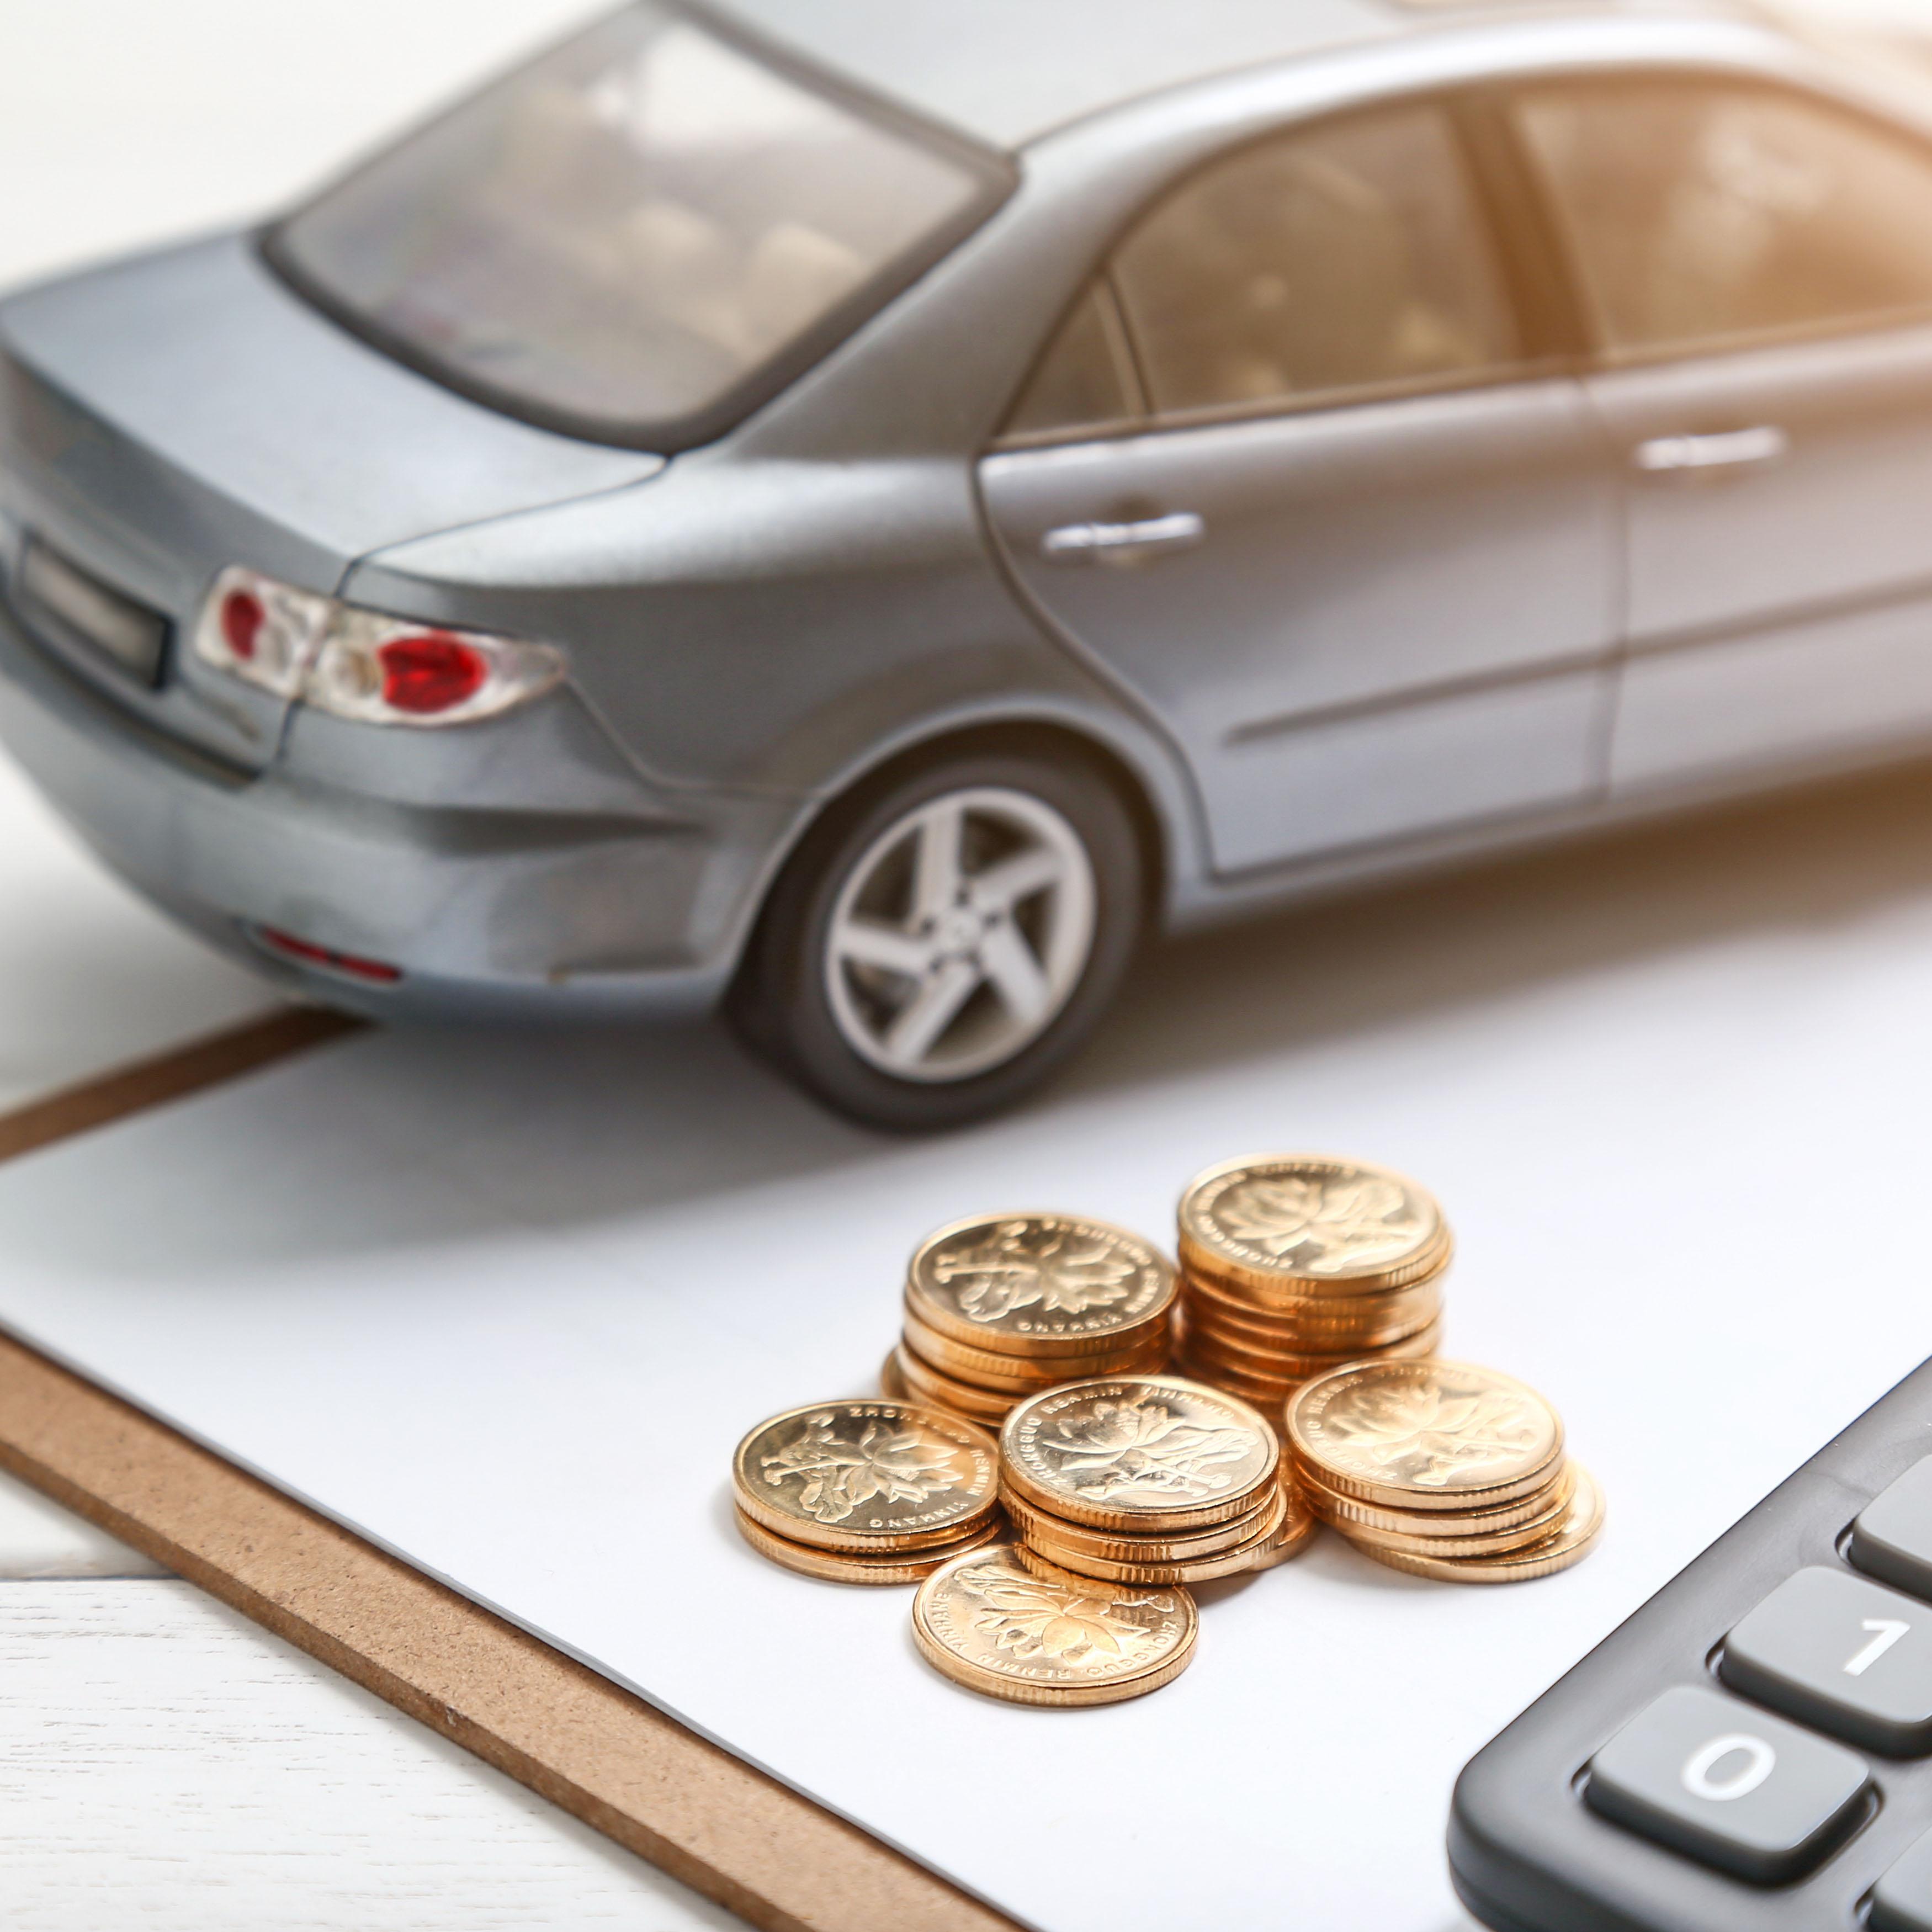 How to Find Cheaper Auto Insurance Premiums